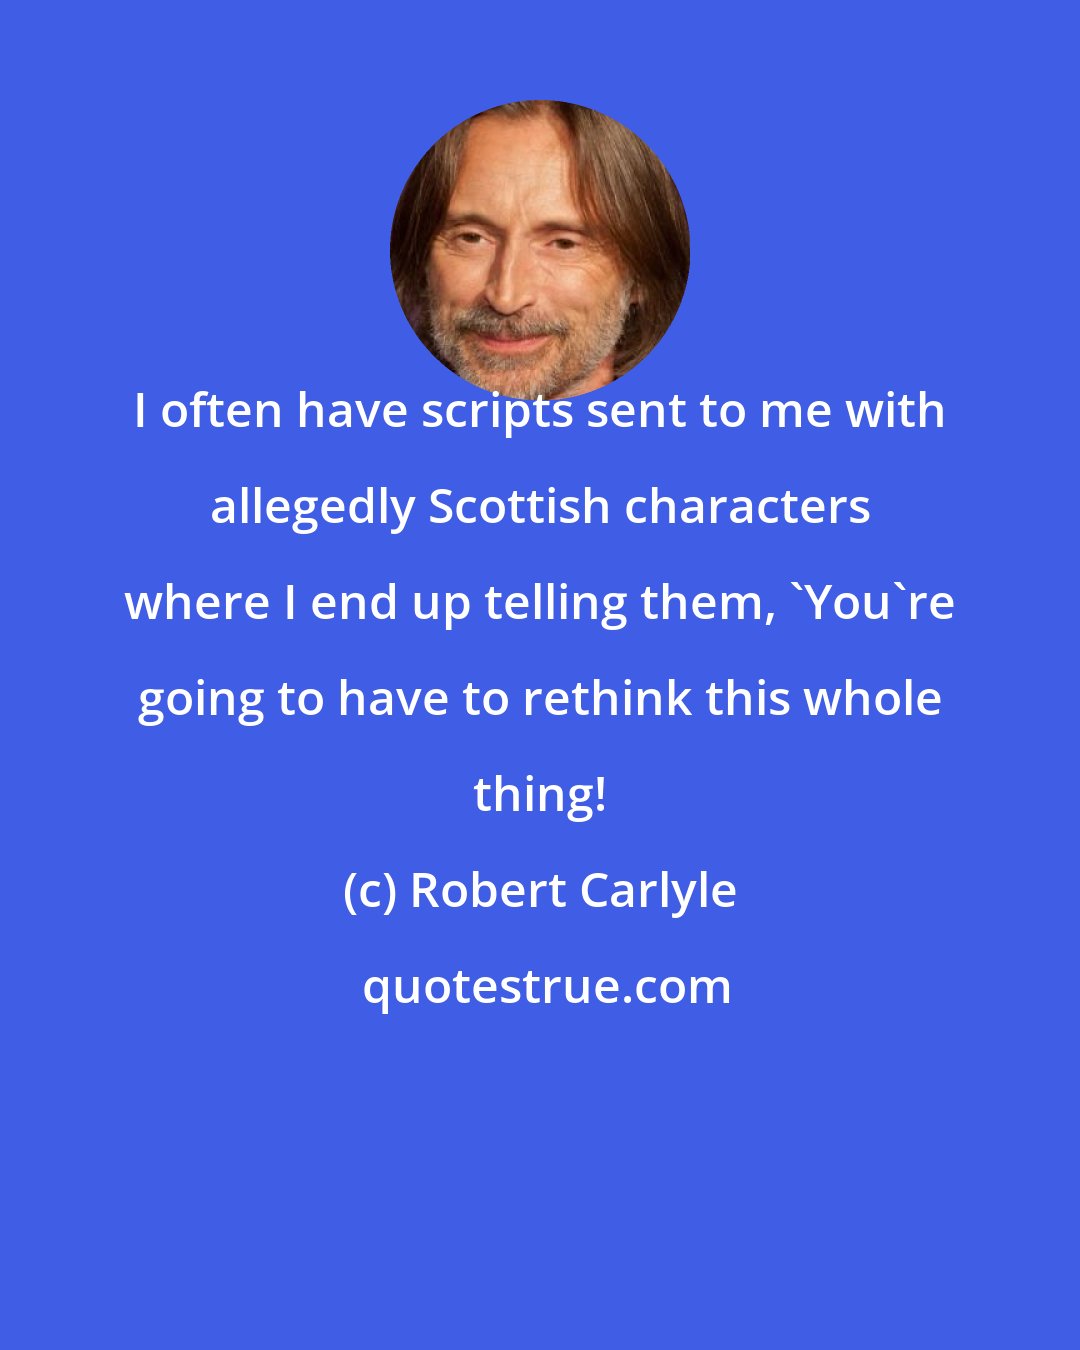 Robert Carlyle: I often have scripts sent to me with allegedly Scottish characters where I end up telling them, 'You're going to have to rethink this whole thing!